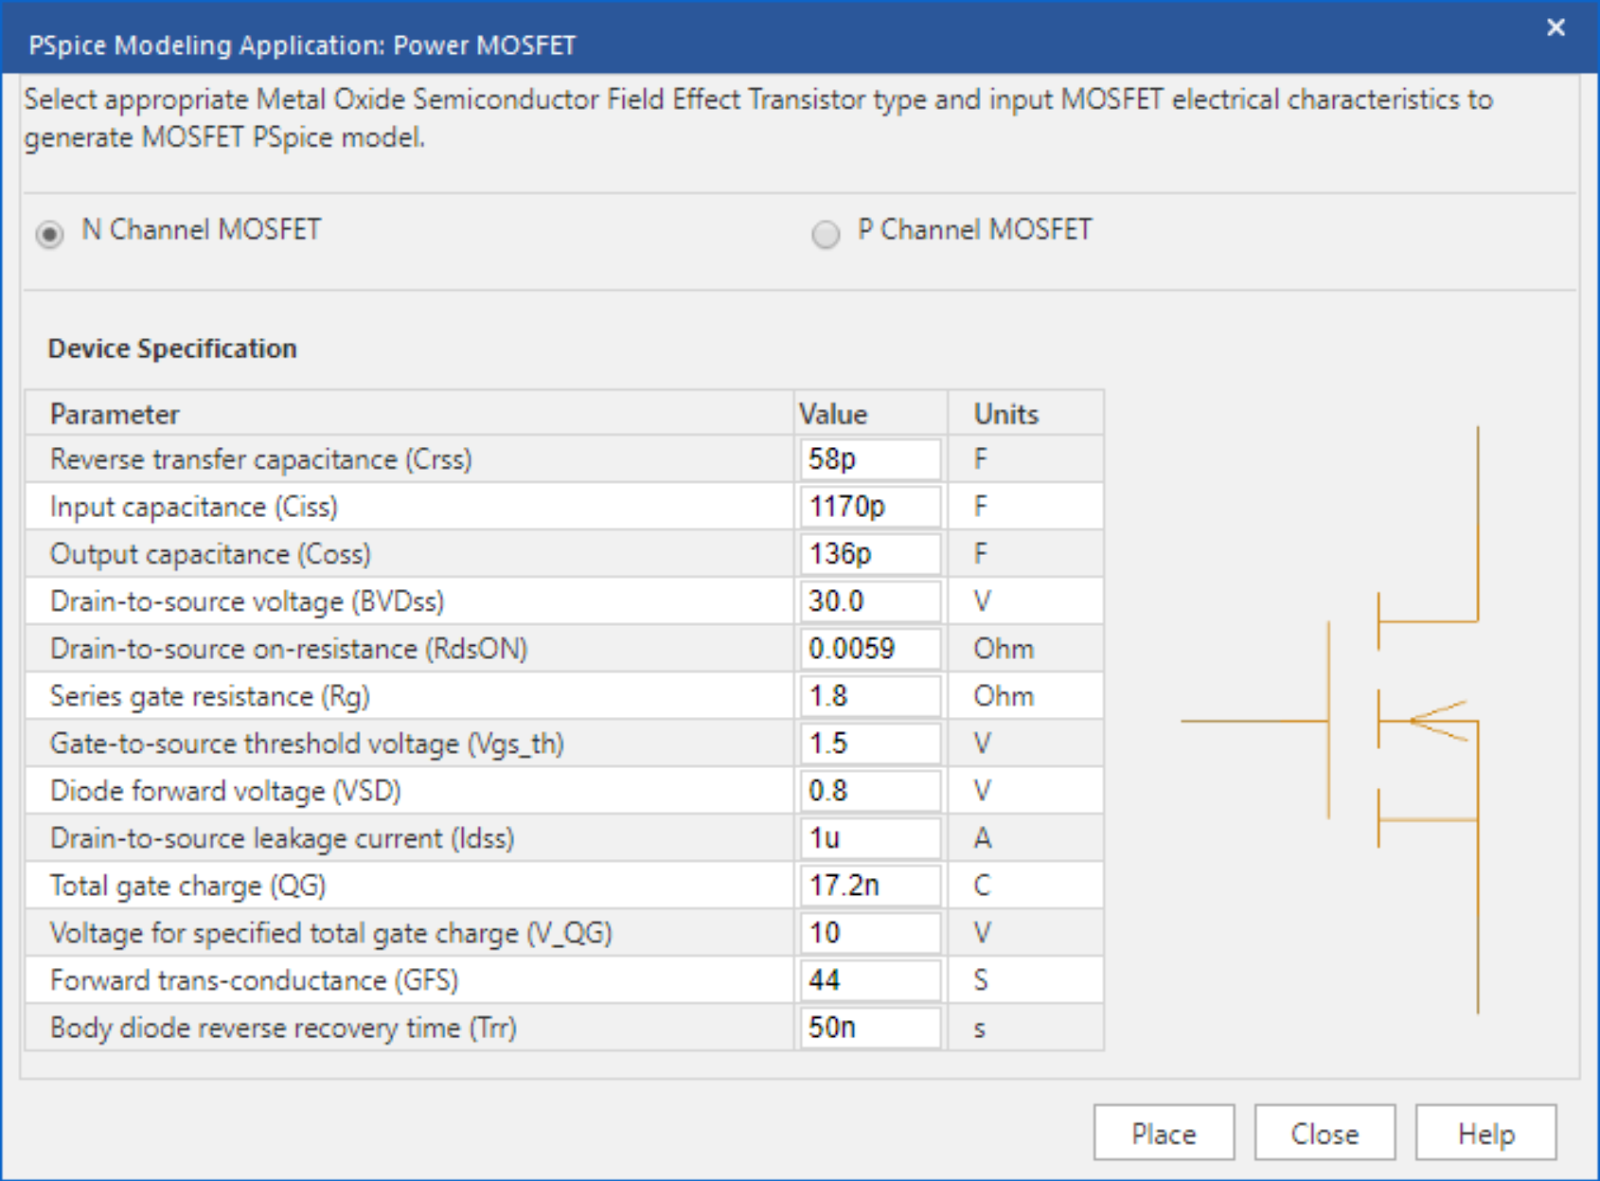 Creating a Power MOSFET SPICE Model with the PSpice Modeling Application